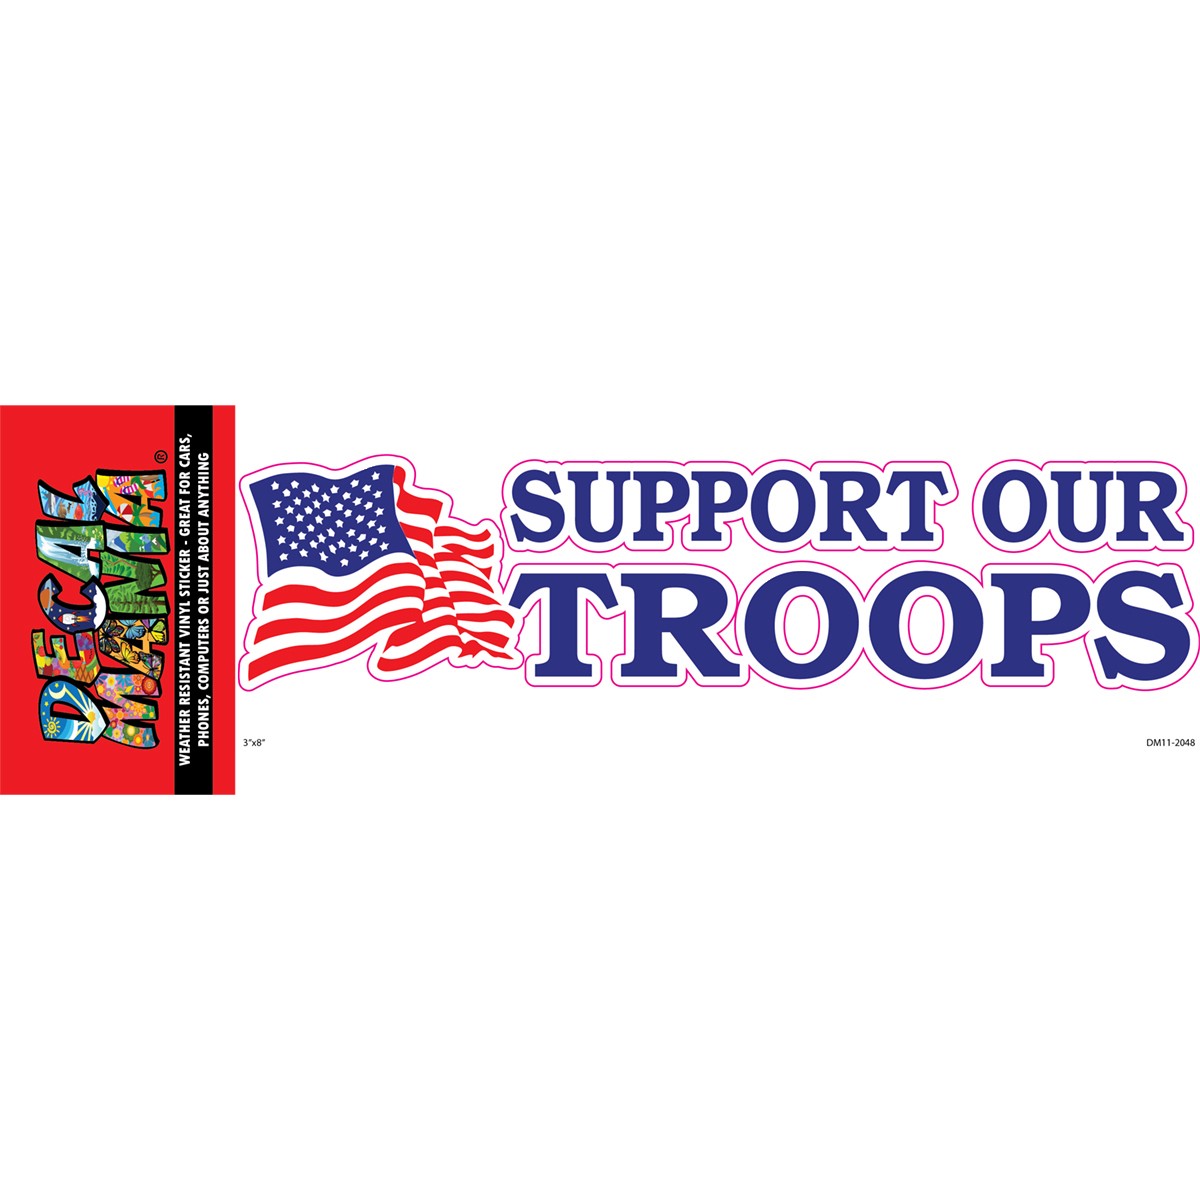 Decal support our troops 1k 8in